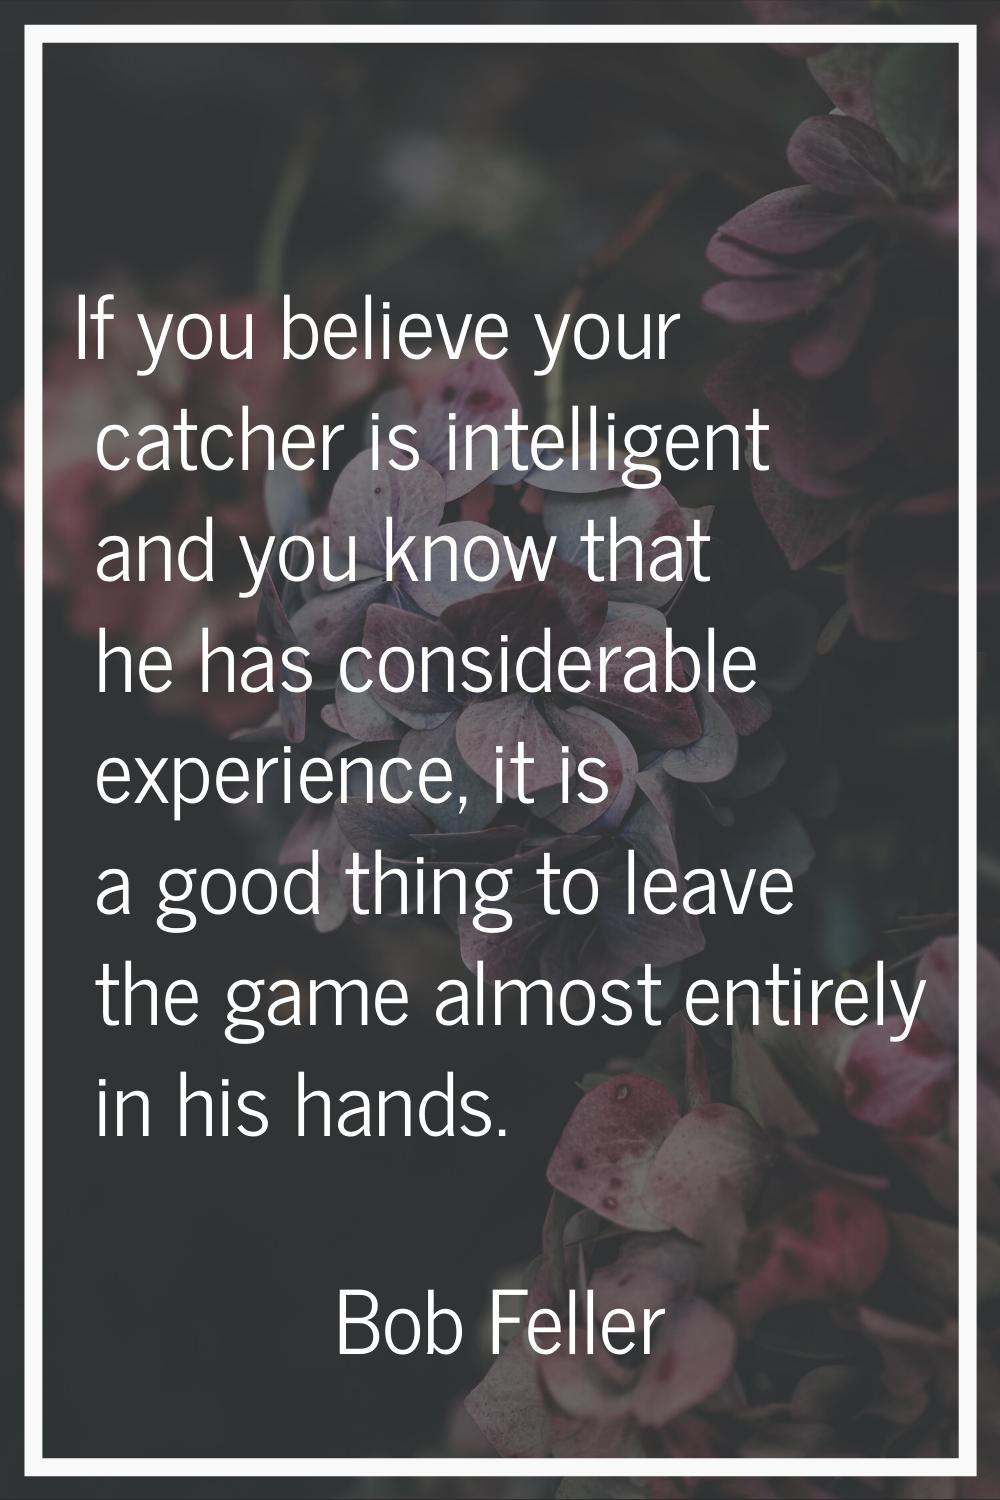 If you believe your catcher is intelligent and you know that he has considerable experience, it is 